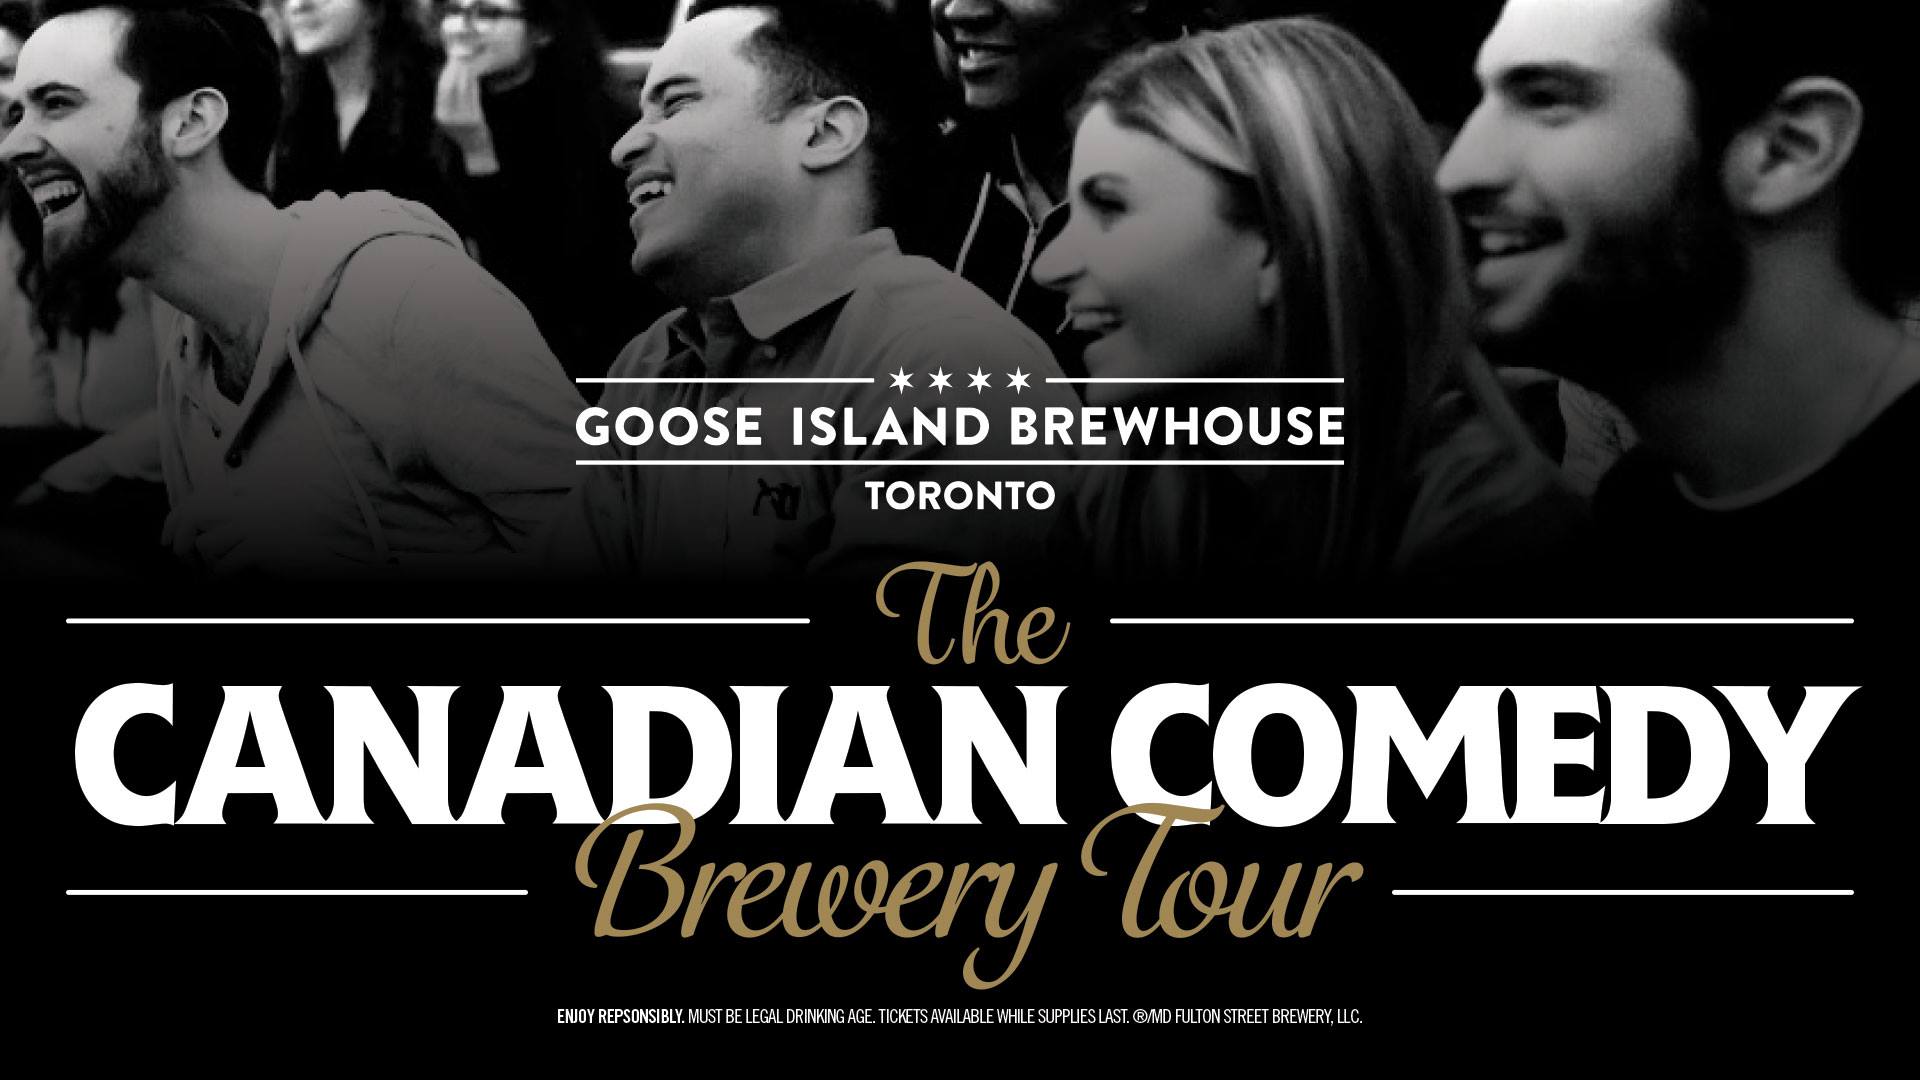 The Canadian Comedy Brewery Tour @ Goose Island Brewhouse Toronto 